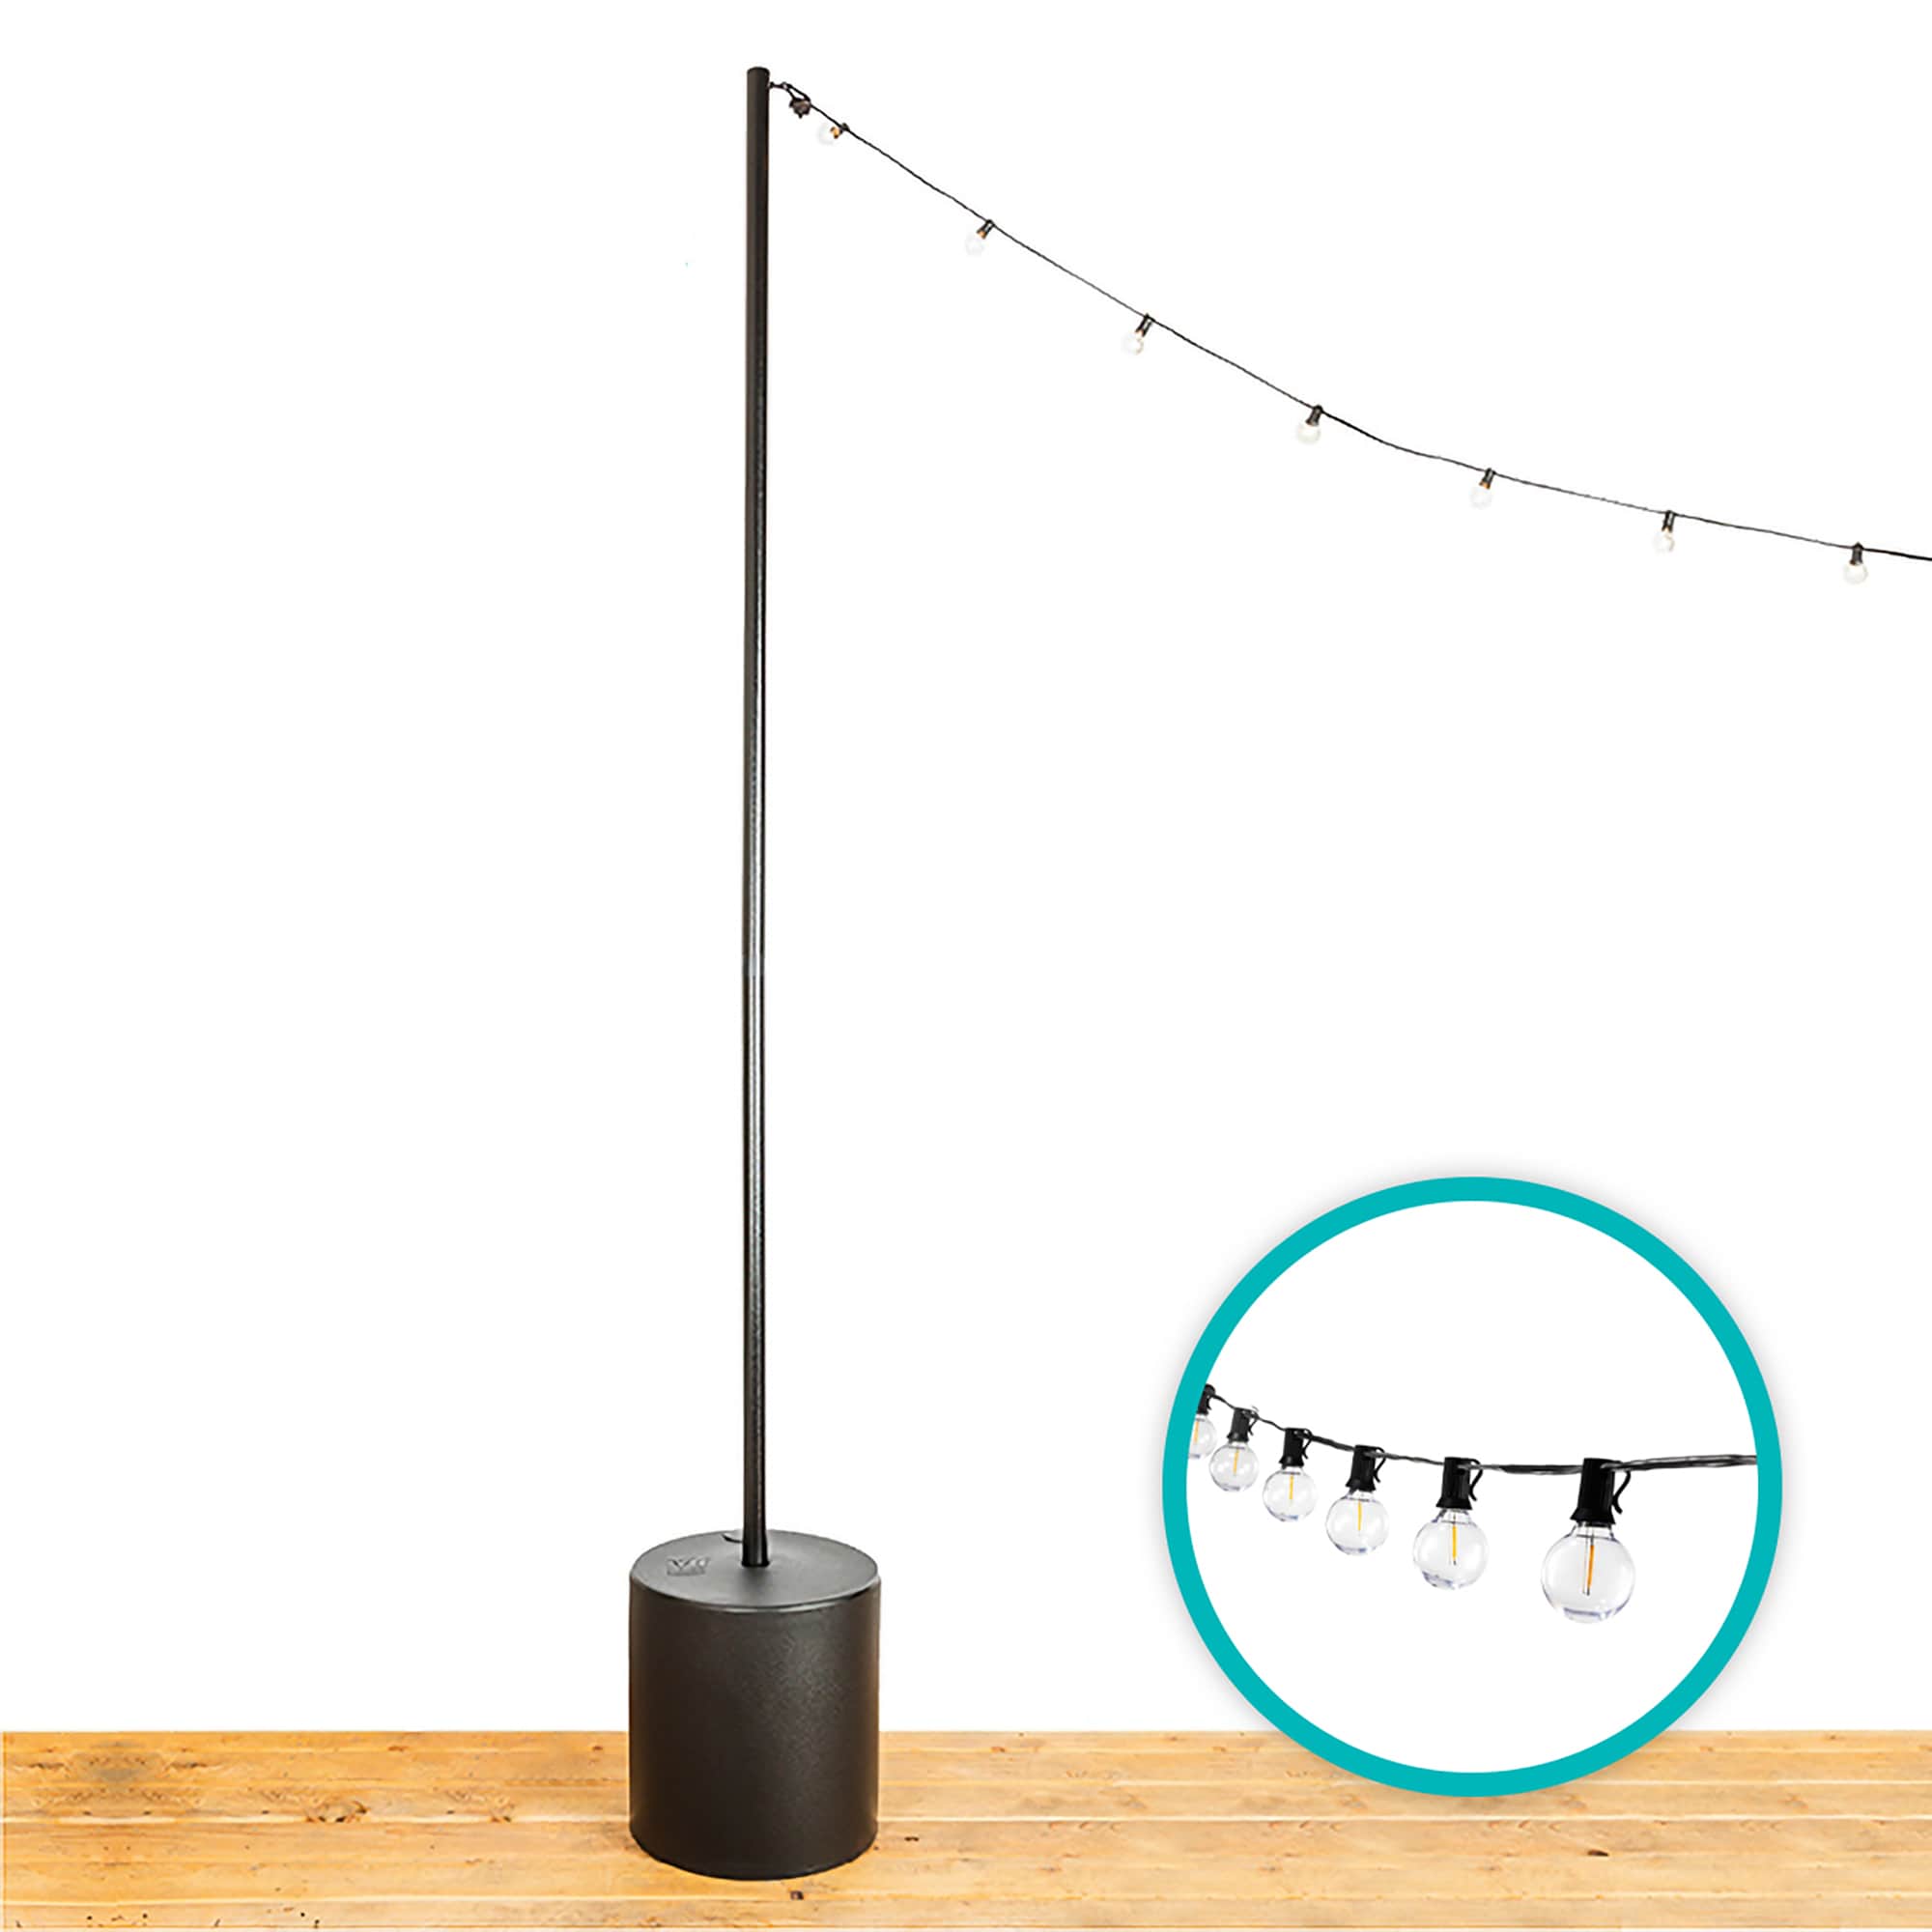 Allsop 9.5' Heavy-Duty String Light Pole Stand with Freestanding Tank Base  for Grass, Patio, Events in the Landscape Lighting Accessories department  at